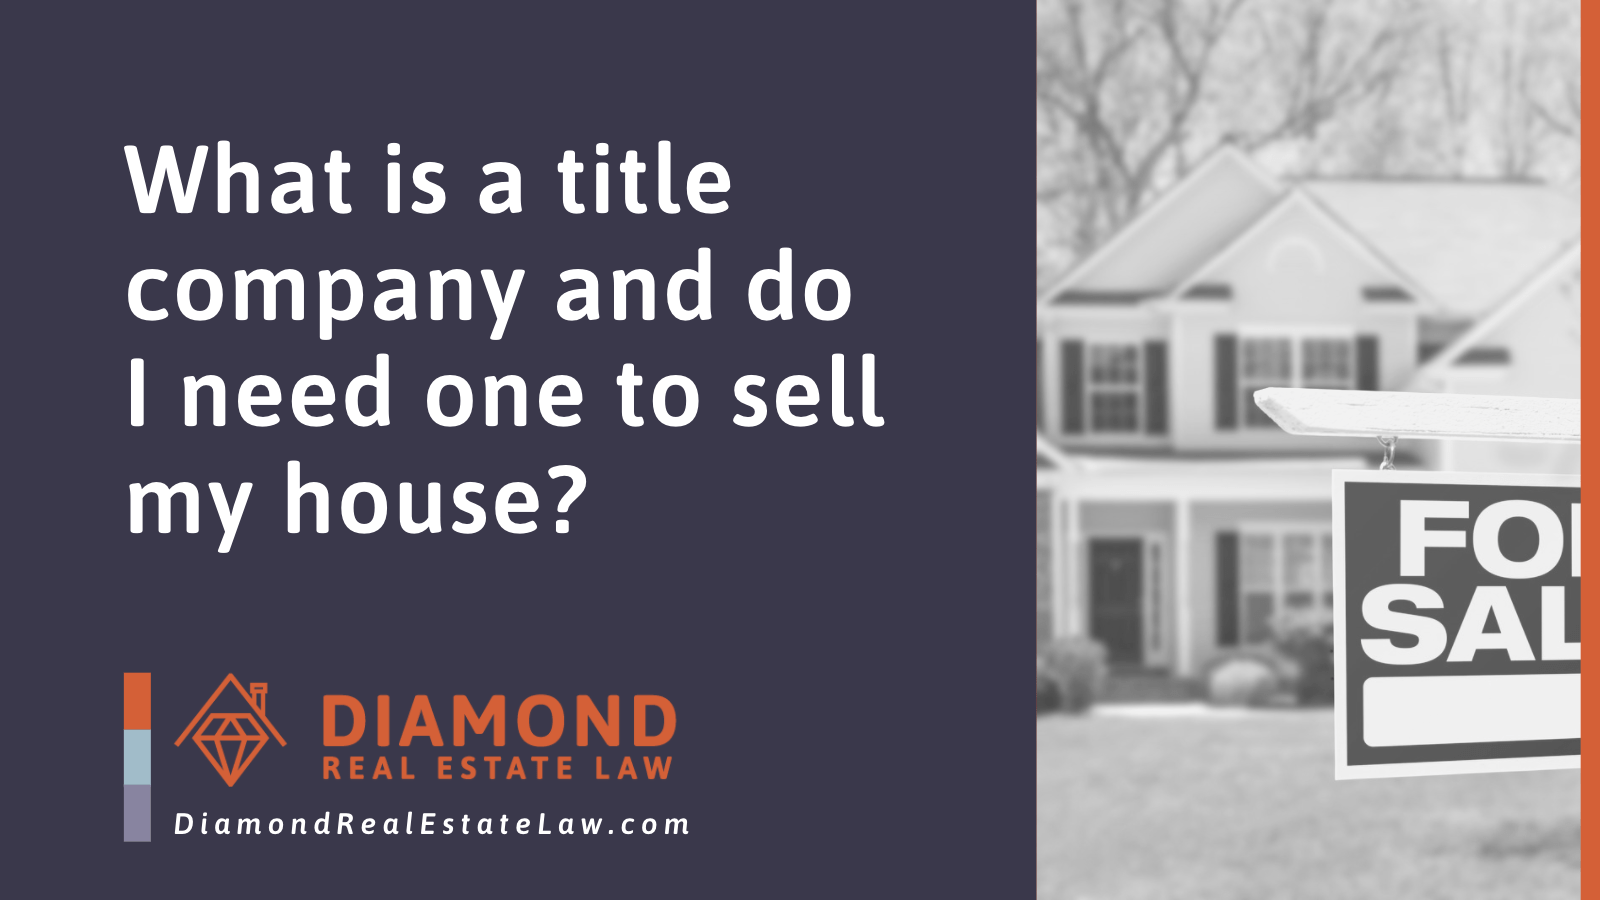 What is a title company and do I need one to sell my house - Diamond Real Estate Law | McHenry, IL Residential Real Estate Lawyer